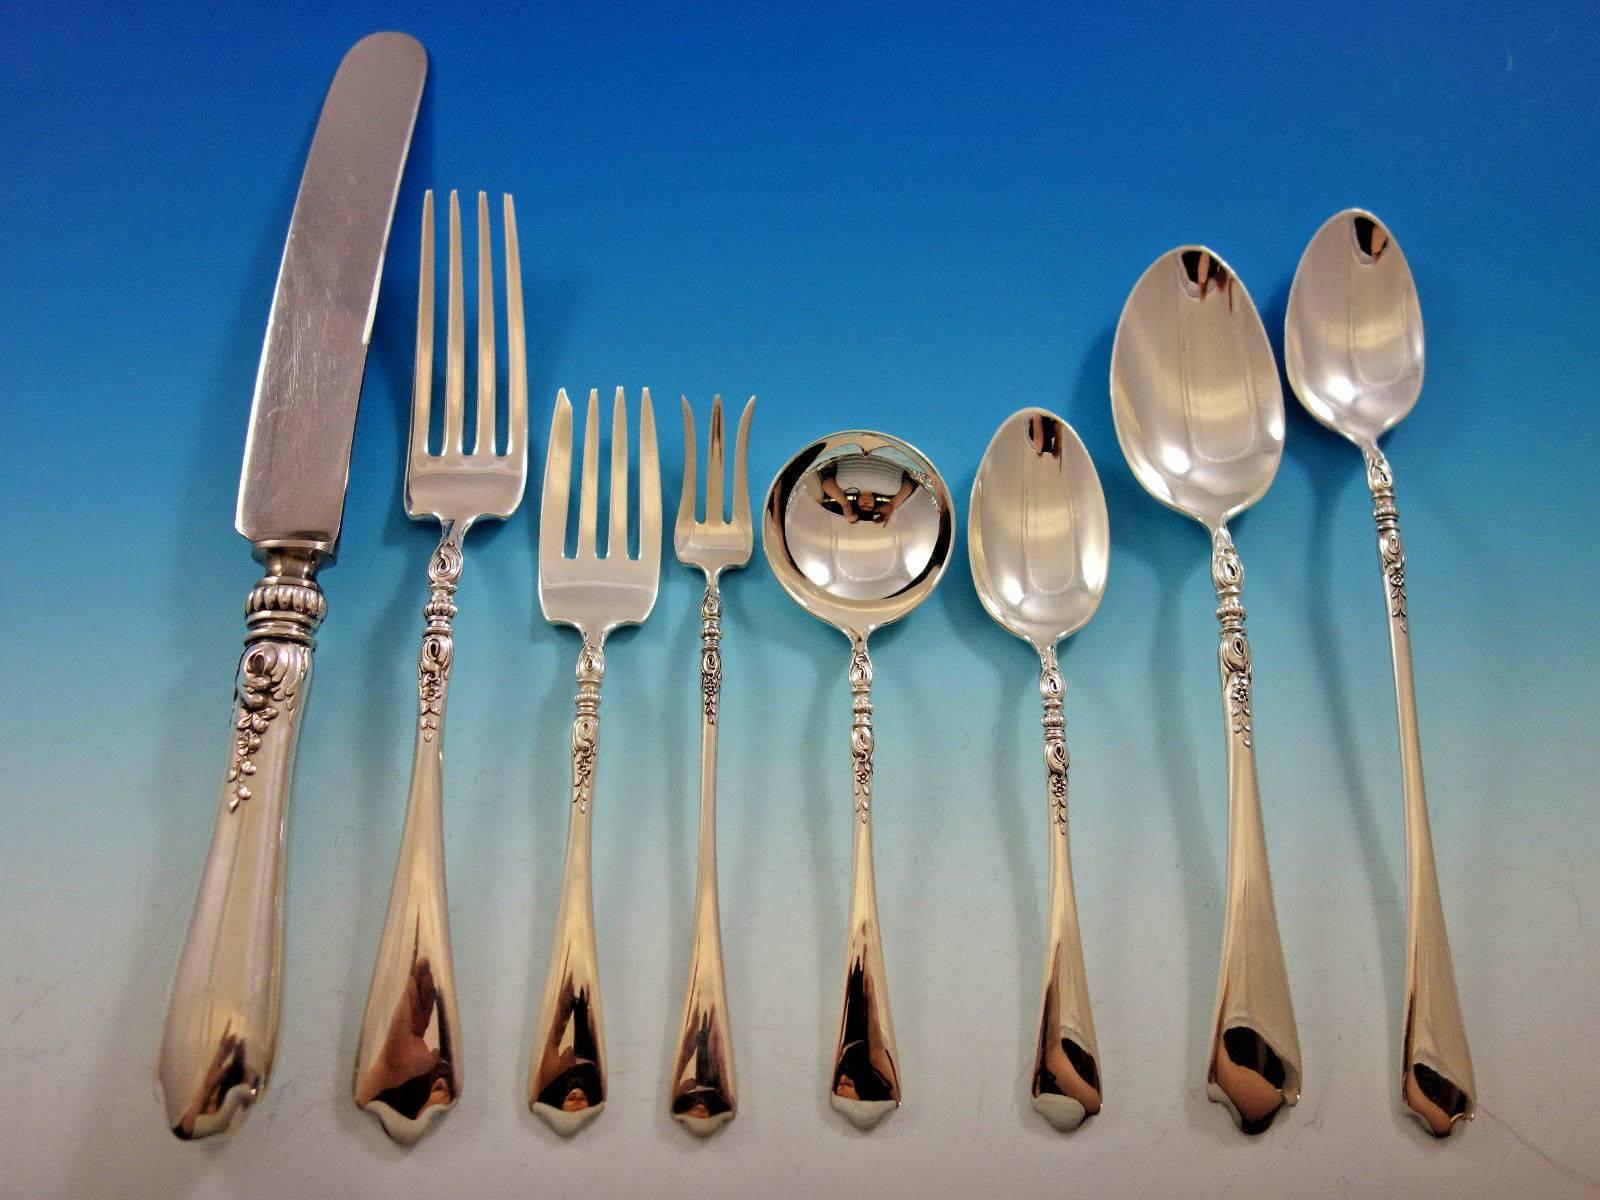 Nellie Custis by Lunt sterling silver flatware set of 53 pieces. This set includes: Six dinner size knives, 9 1/2